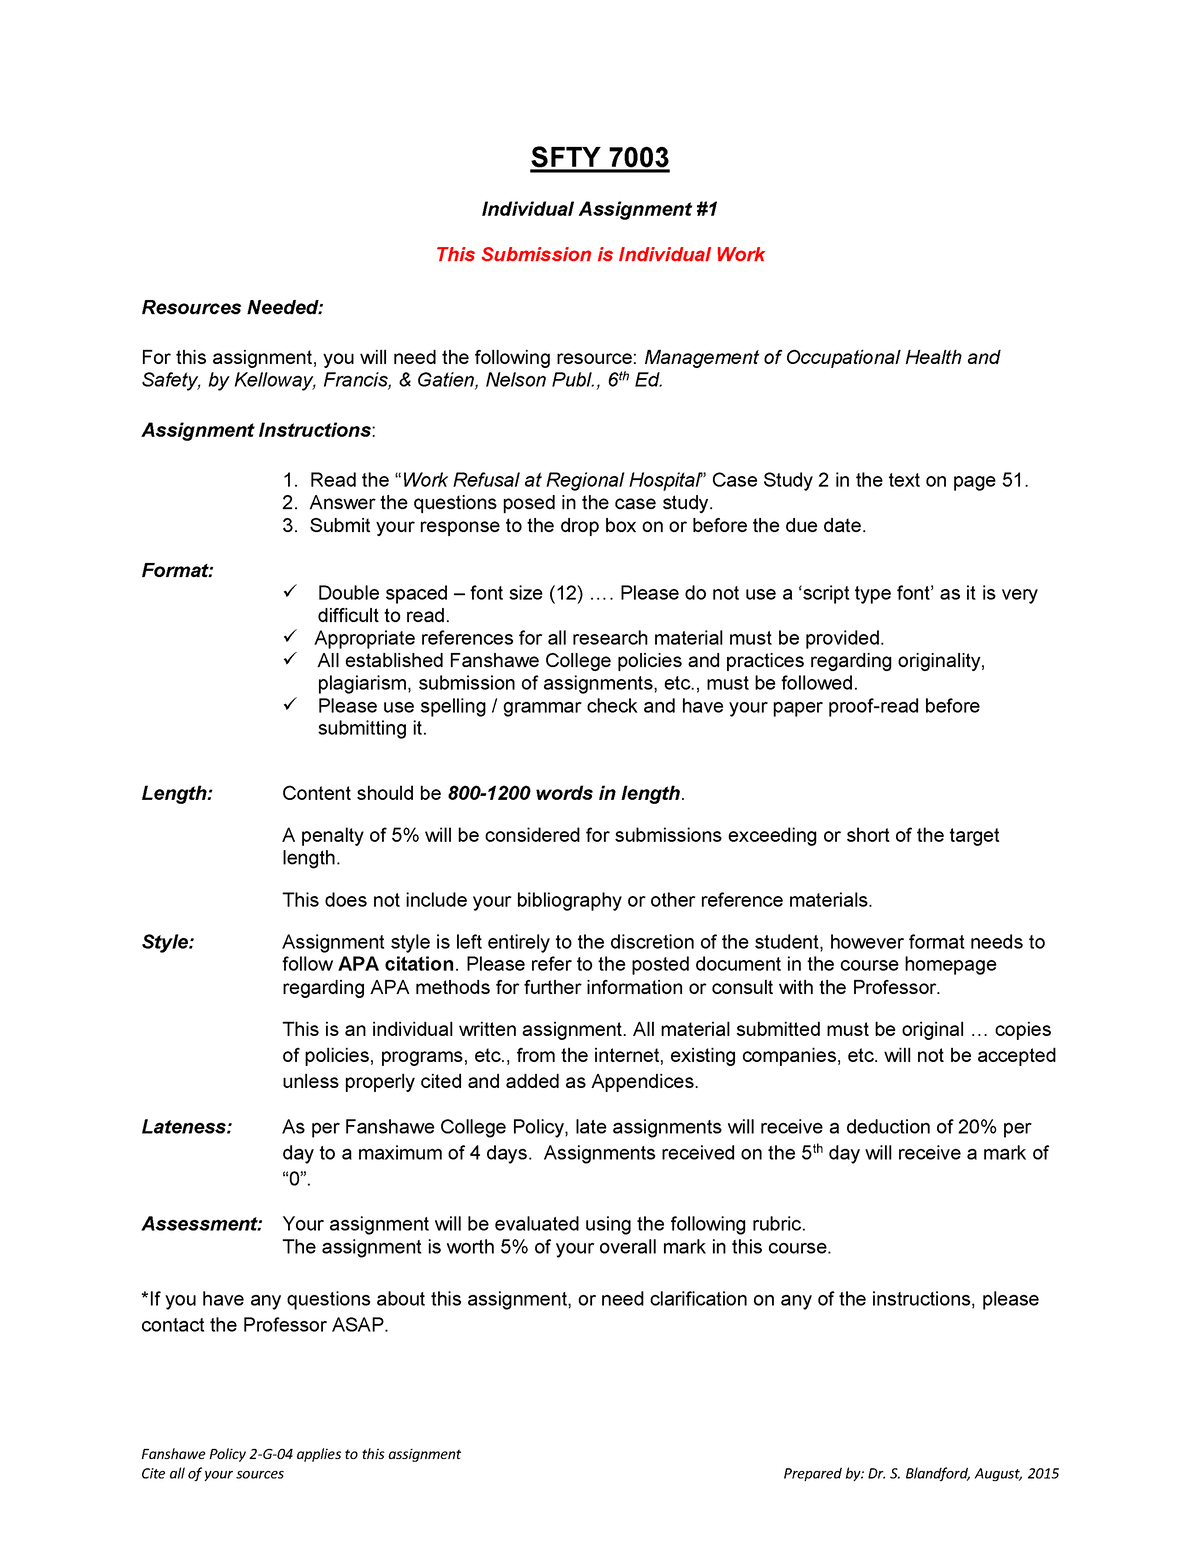 fanshawe college late assignment policy